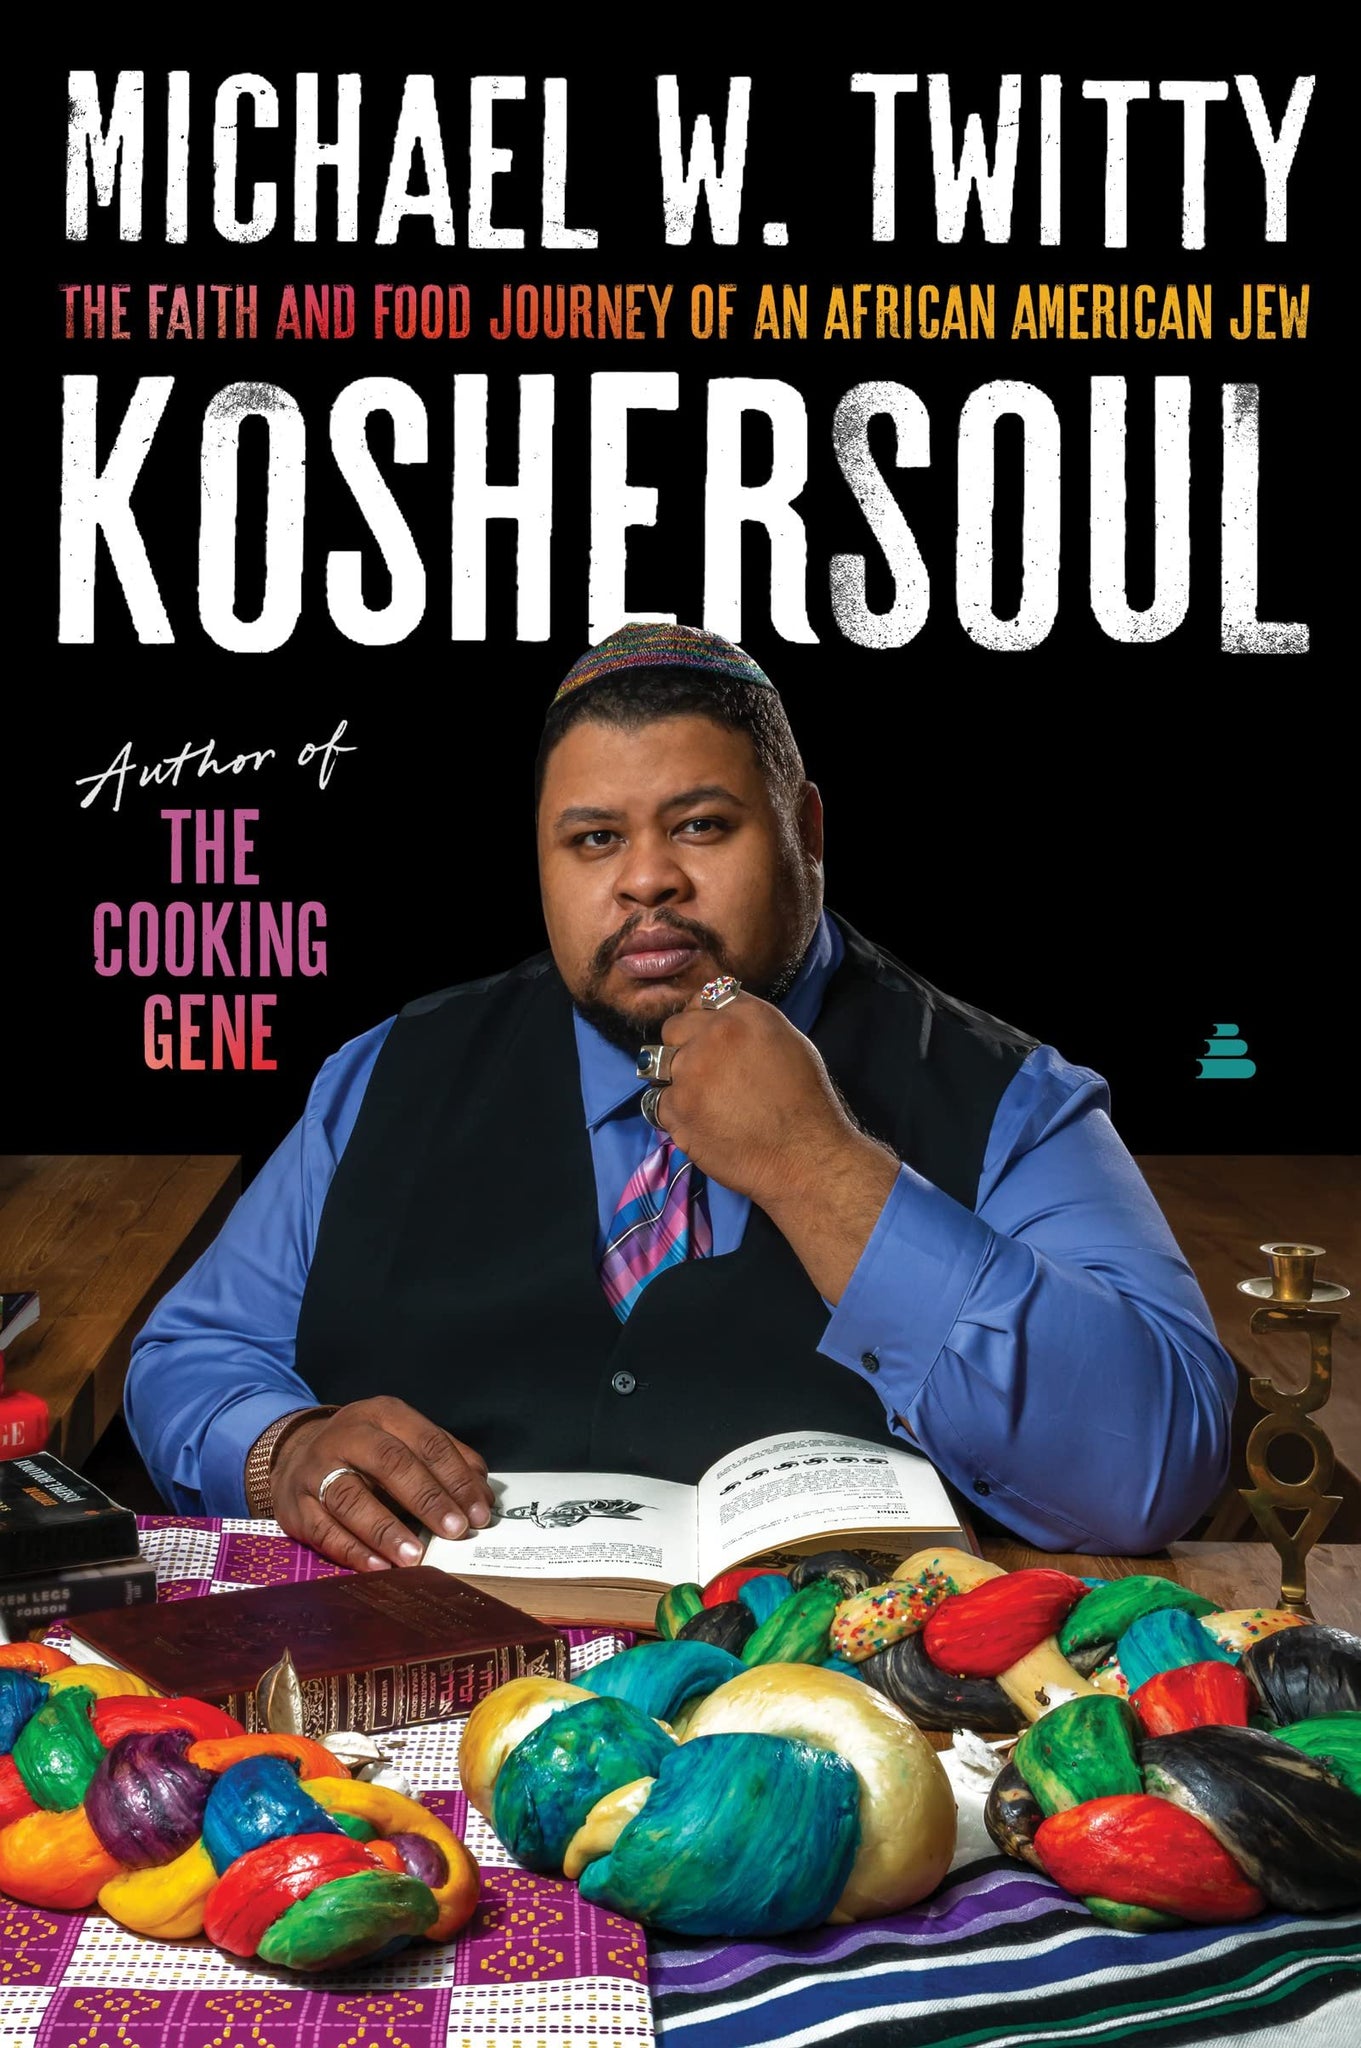 Koshersoul: The Faith and Food Journey of an African American Jew (Paperback)